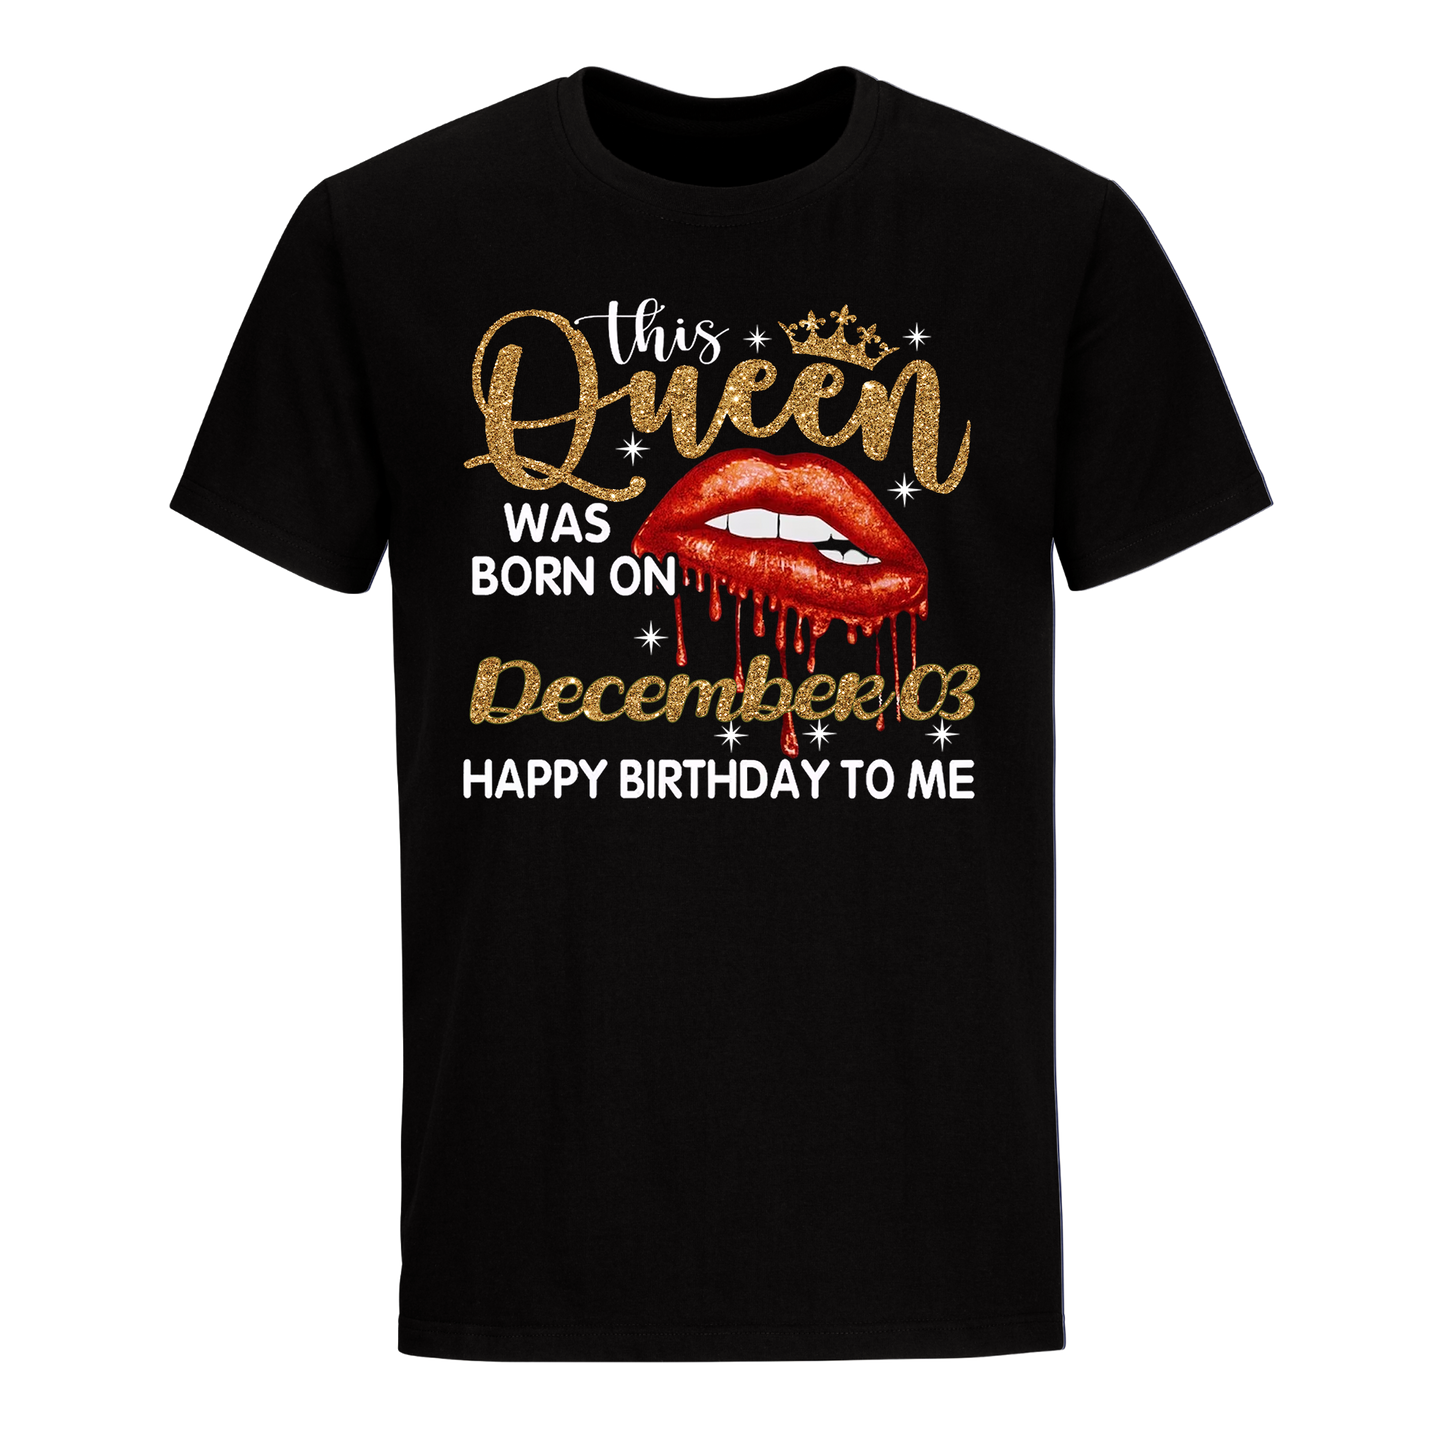 THIS QUEEN WAS BORN ON DECEMBER 03 UNISEX SHIRT